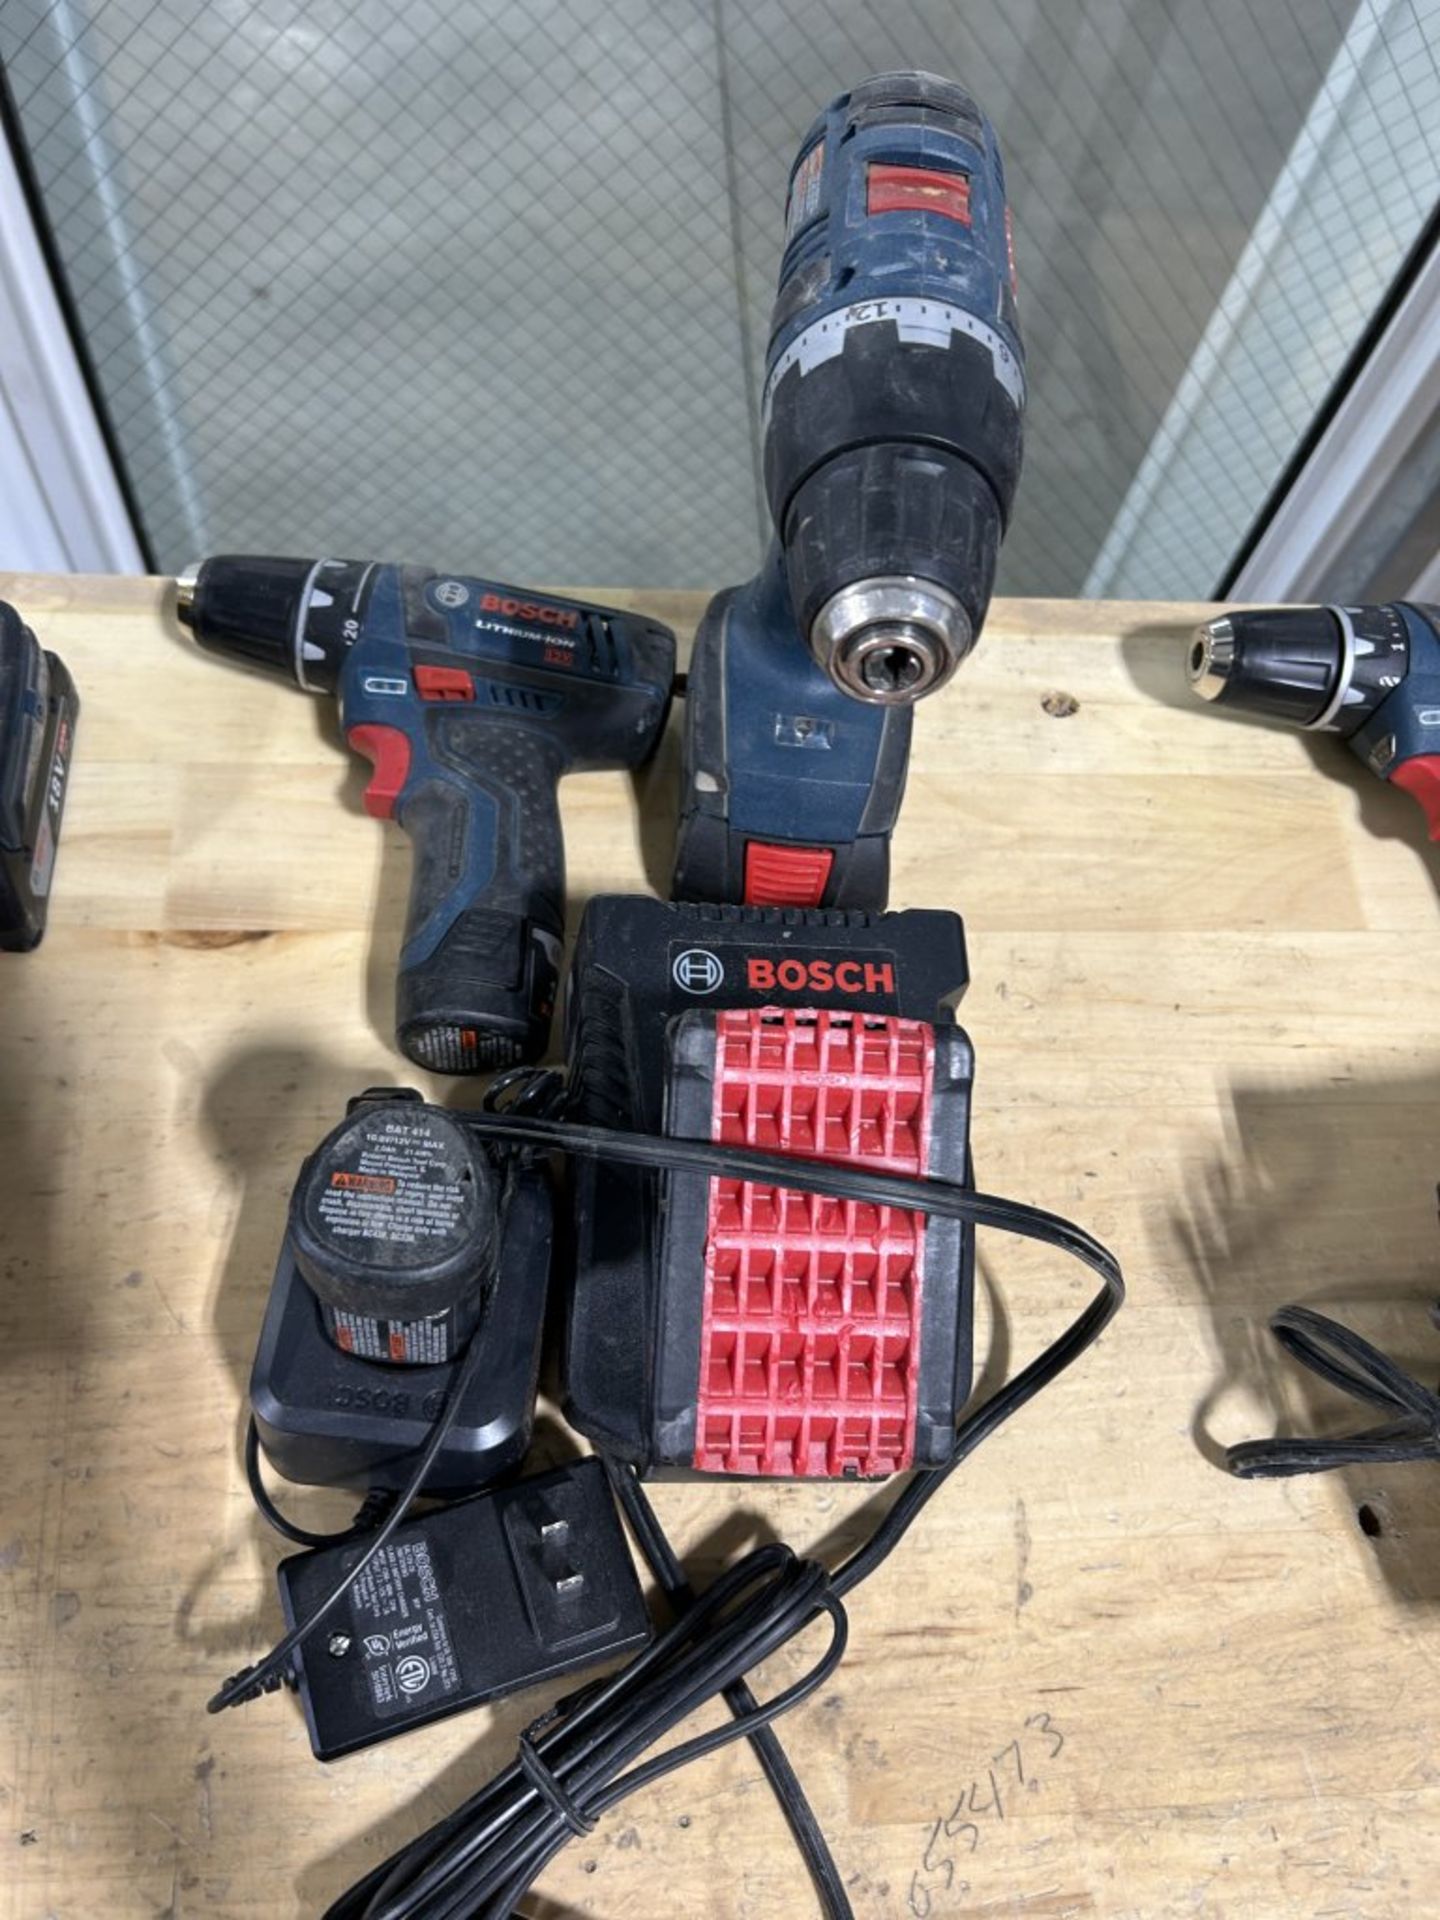 BOSCH LITHIUM ION 18V & 12V CORDLESS DRILLS, EACH WITH 2 BATTERIES AND CHARGER